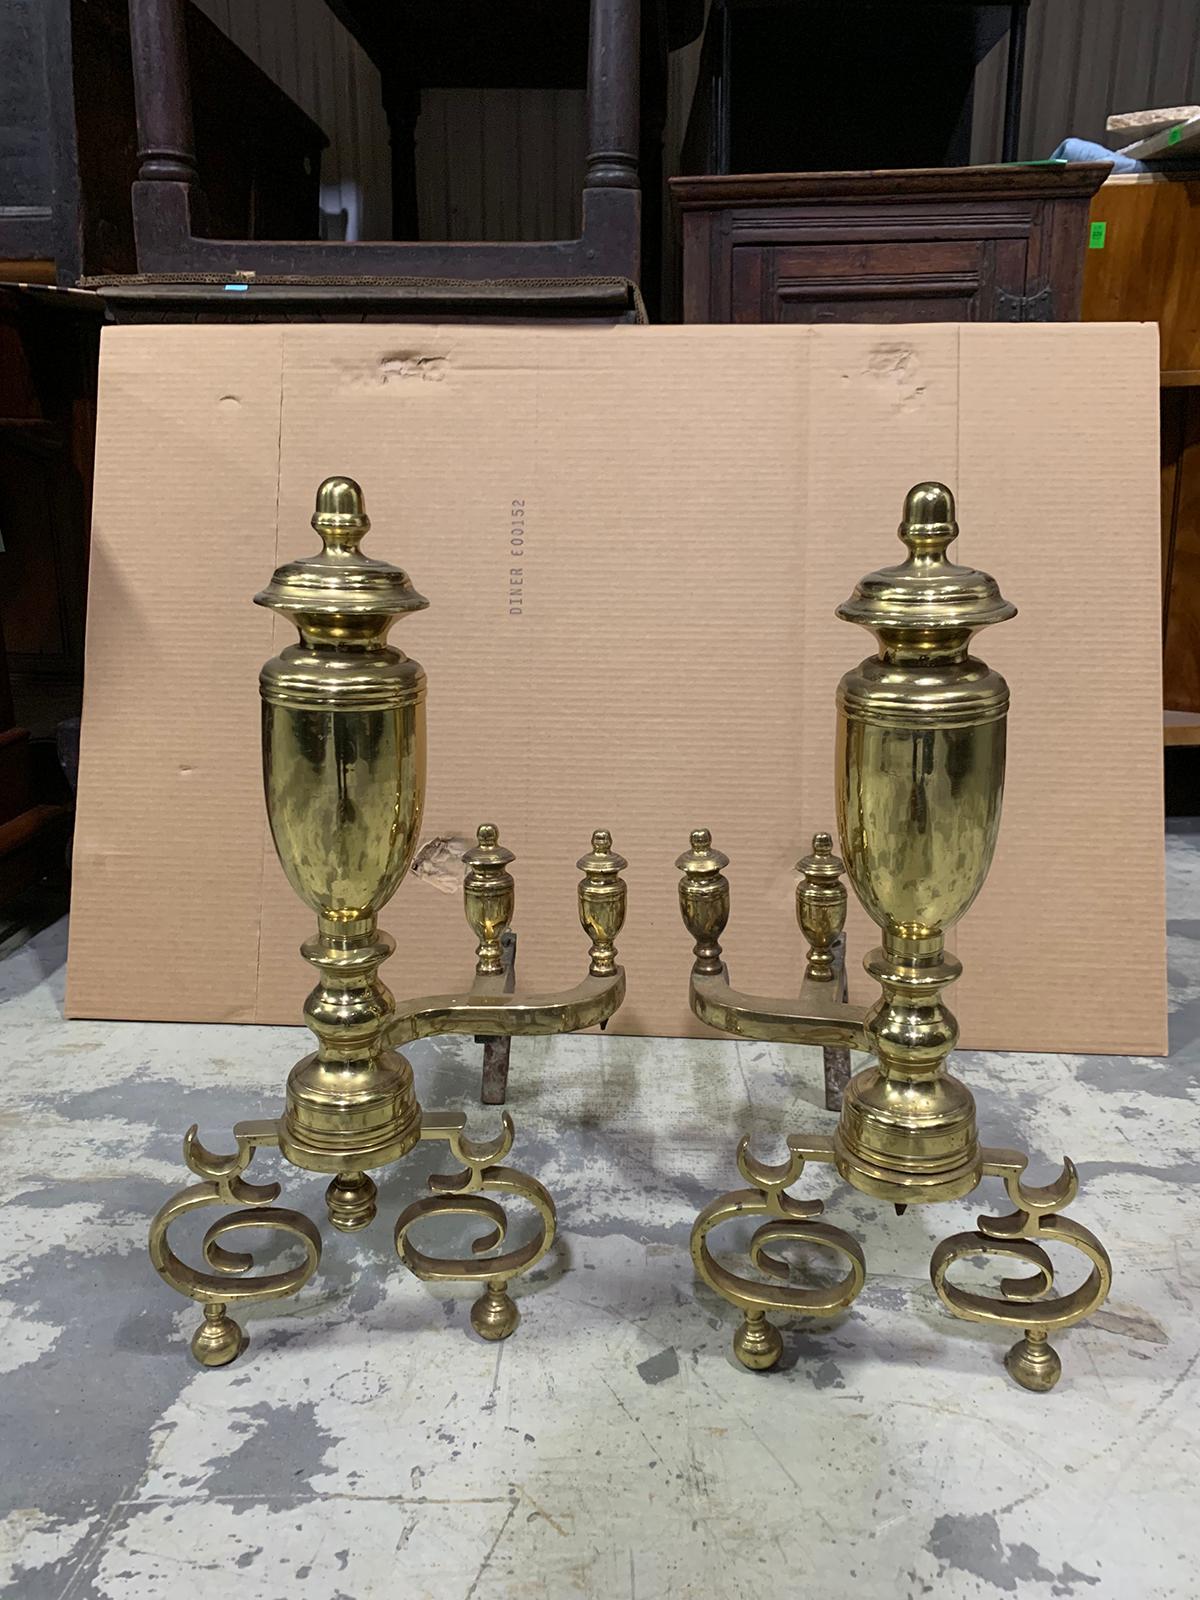 Pair of 20th century brass urn andirons with scrolled feet.